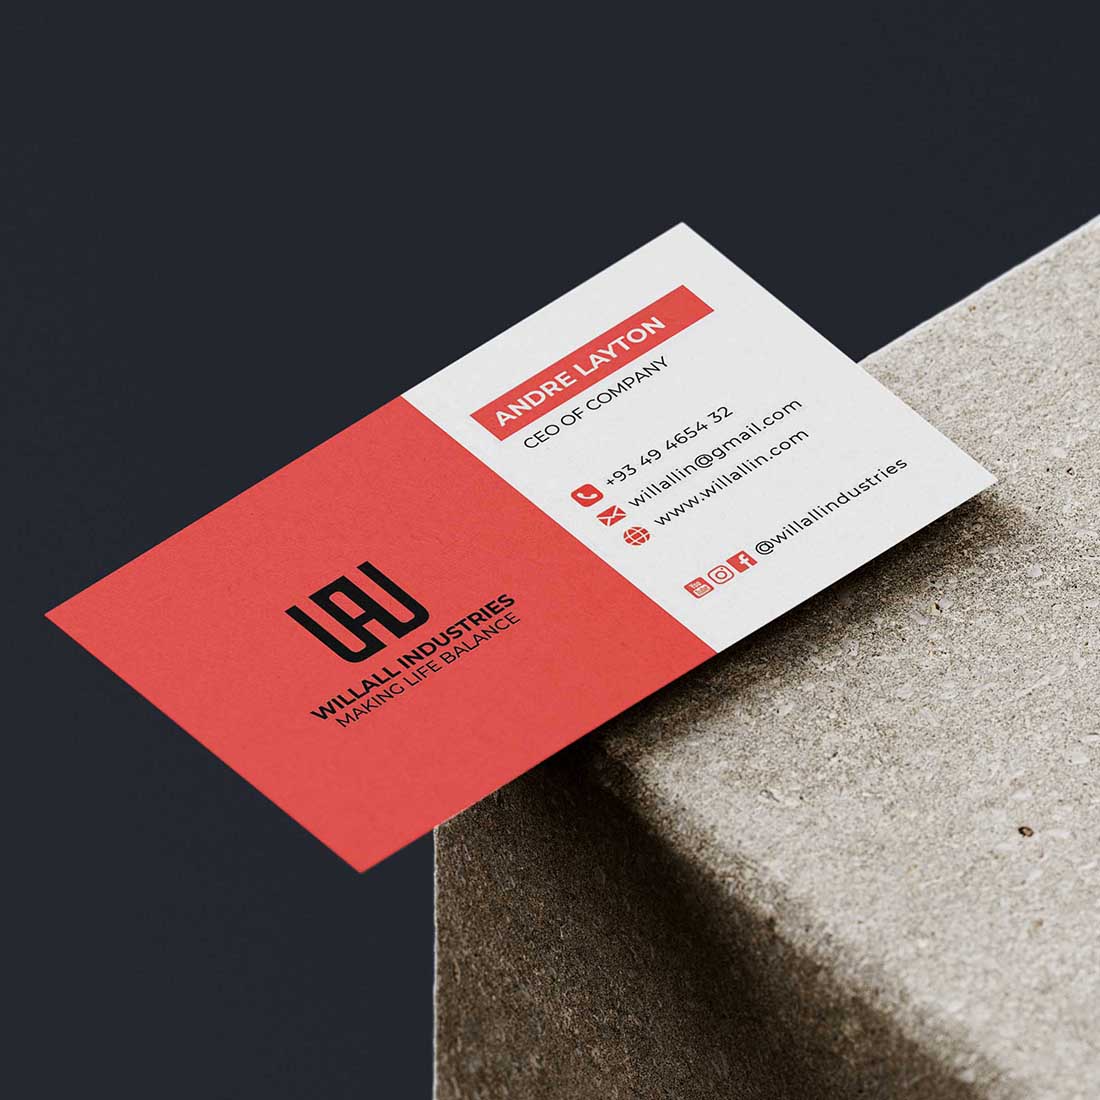 Company Business Card - (Minimal - Business - Company - Corporate) cover image.